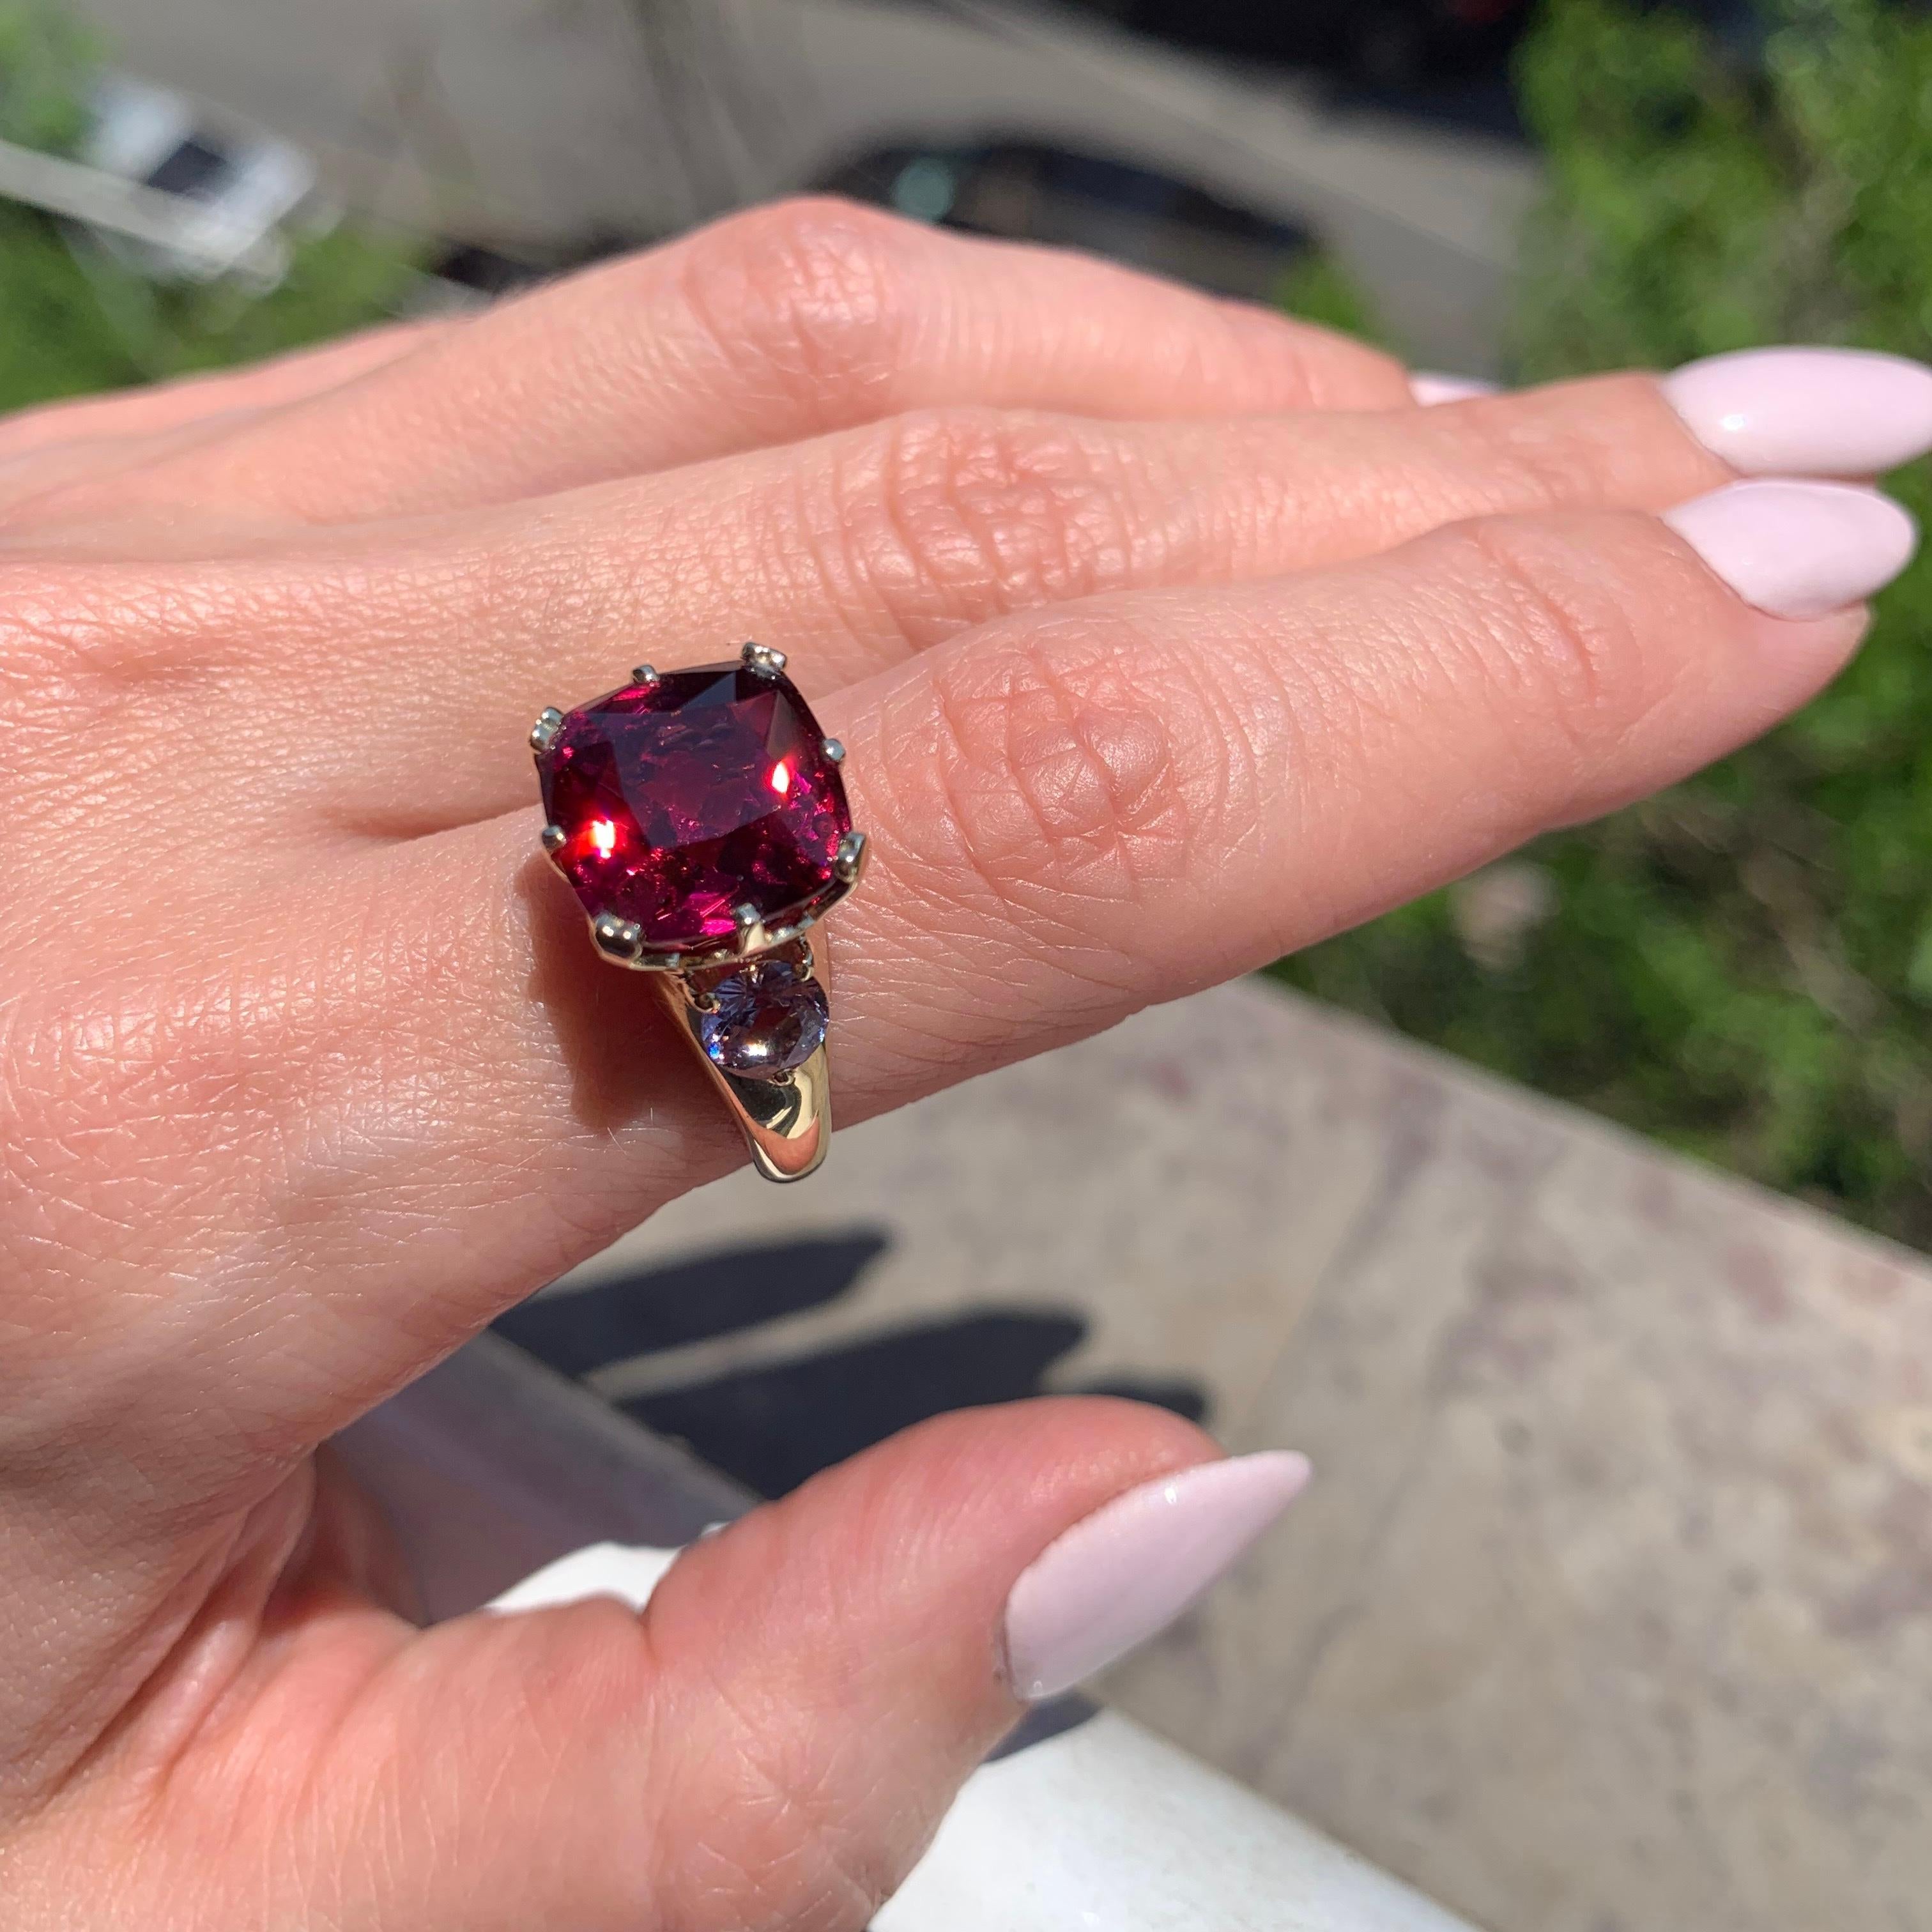 In this ring you can see the ideal combination of gemstones, and it immediately attracks the attention: amazing natural burgundy red rhodolite garnet in quite big size - 9 carat and delicate purple eye clean spinel that increase the shine and color